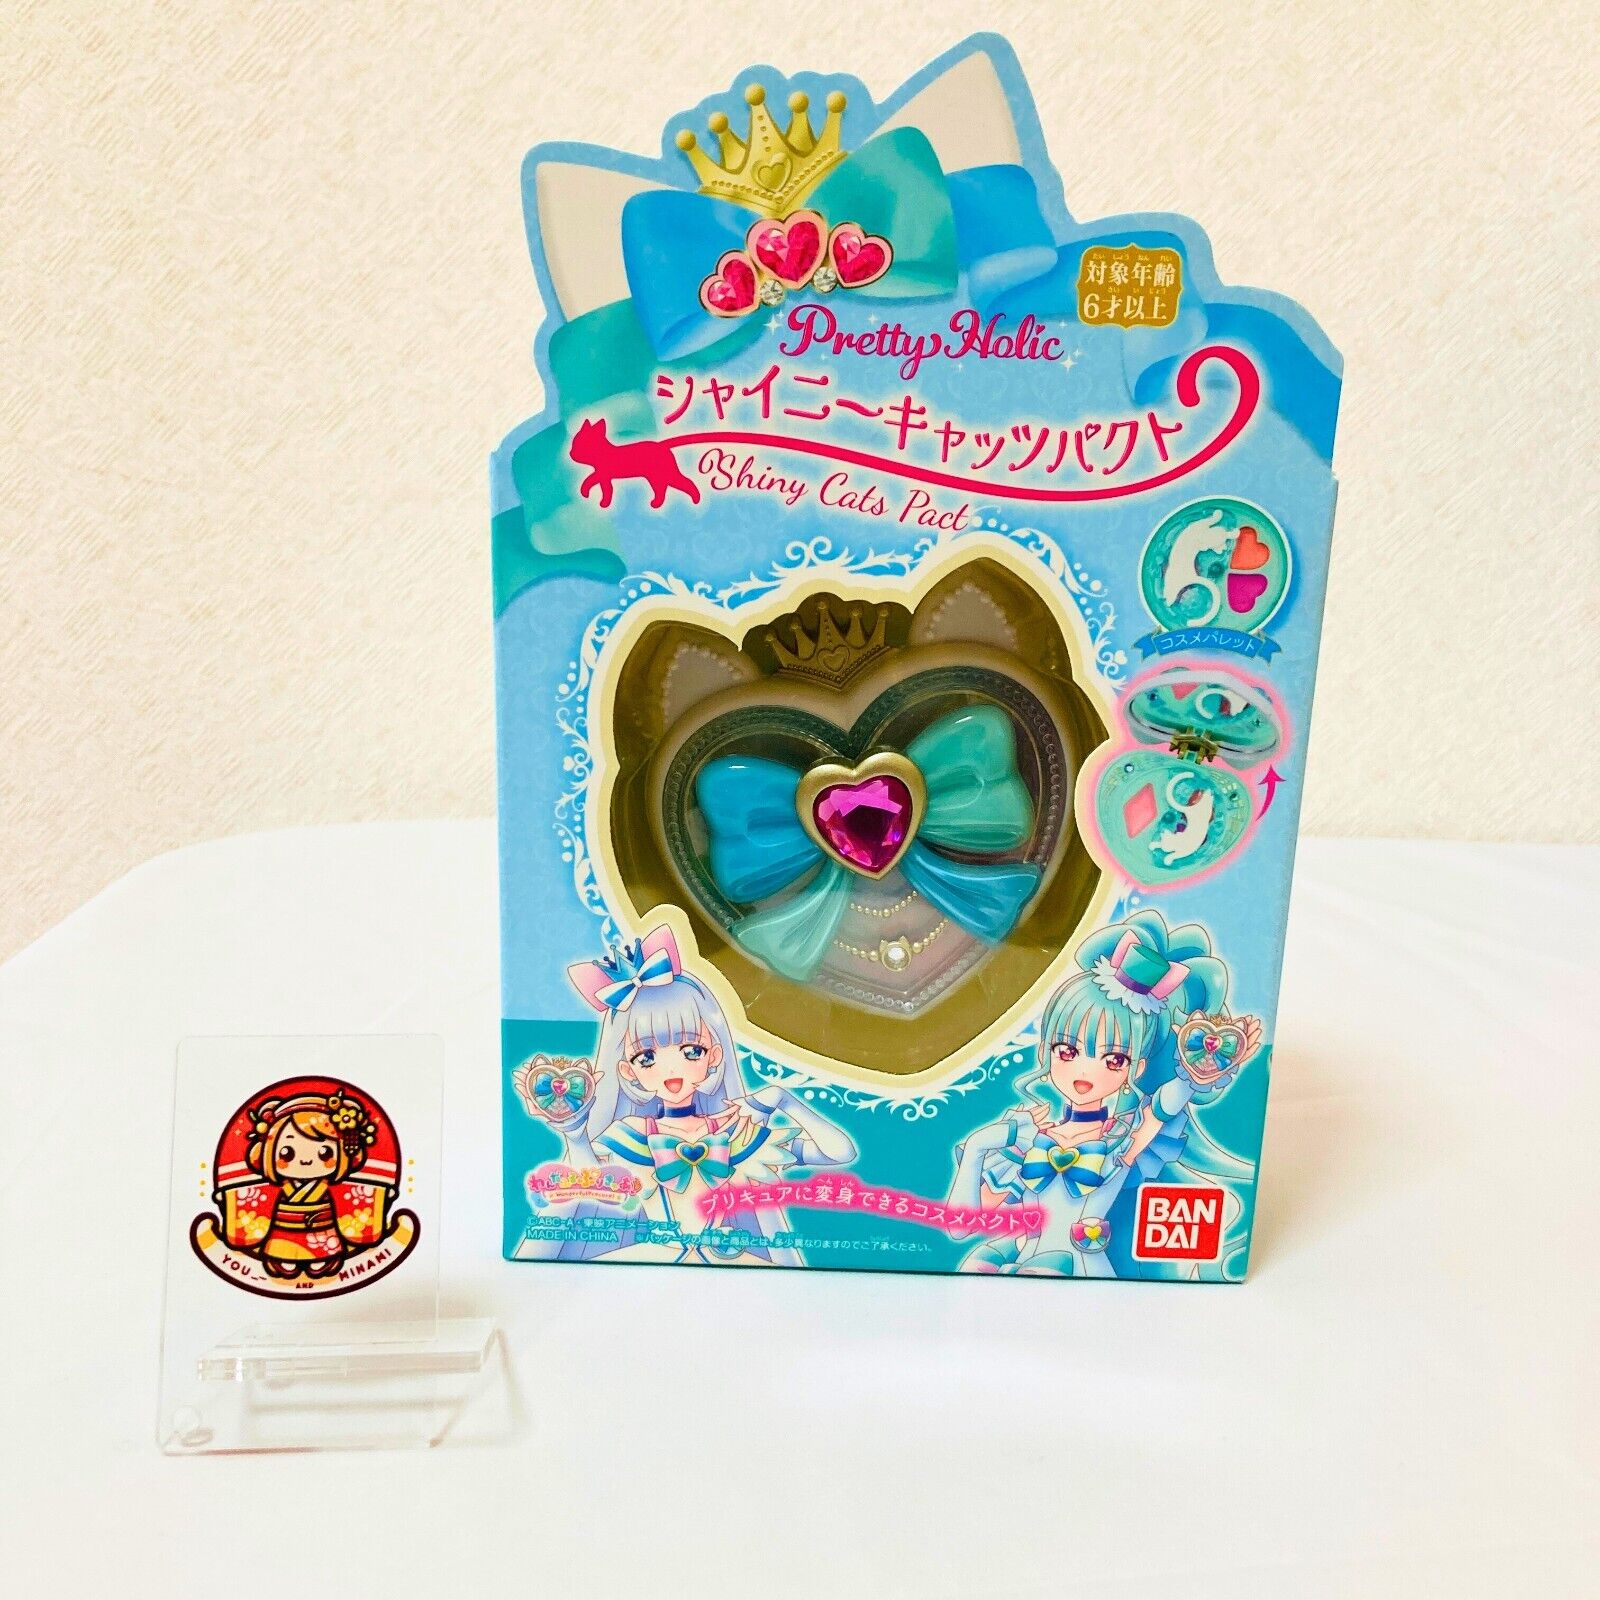 PrettyCure Wonderful Precure Pretty Holic Shiny Cats Pact From Japan New 